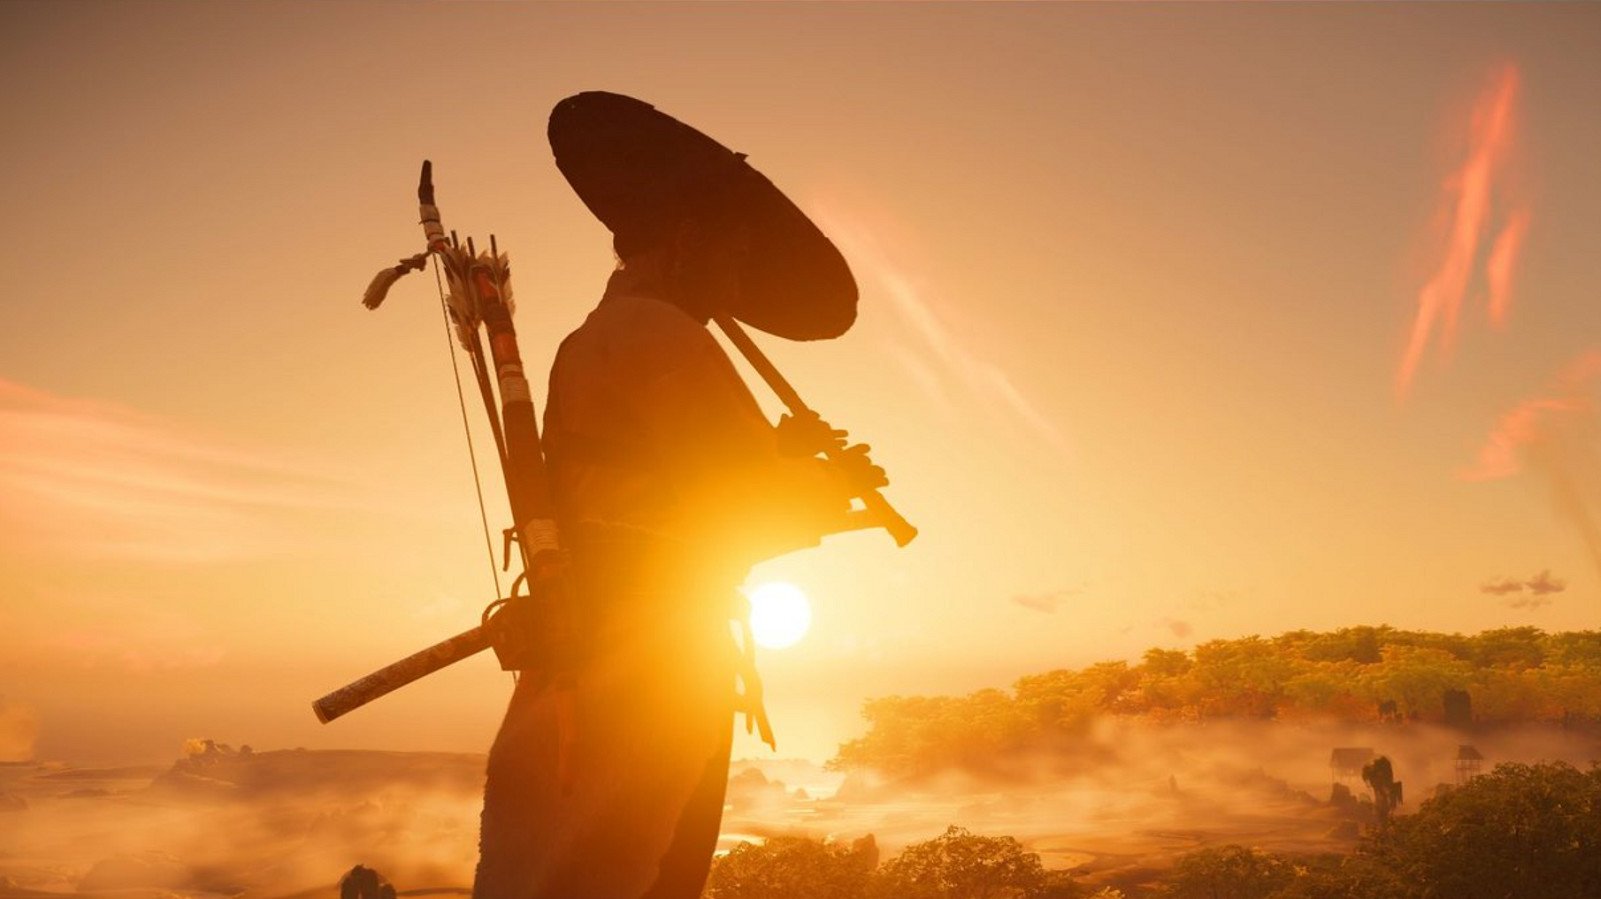 Ghost of Tsushima's Director's Cut upgrades are nice, but the new content  is what matters